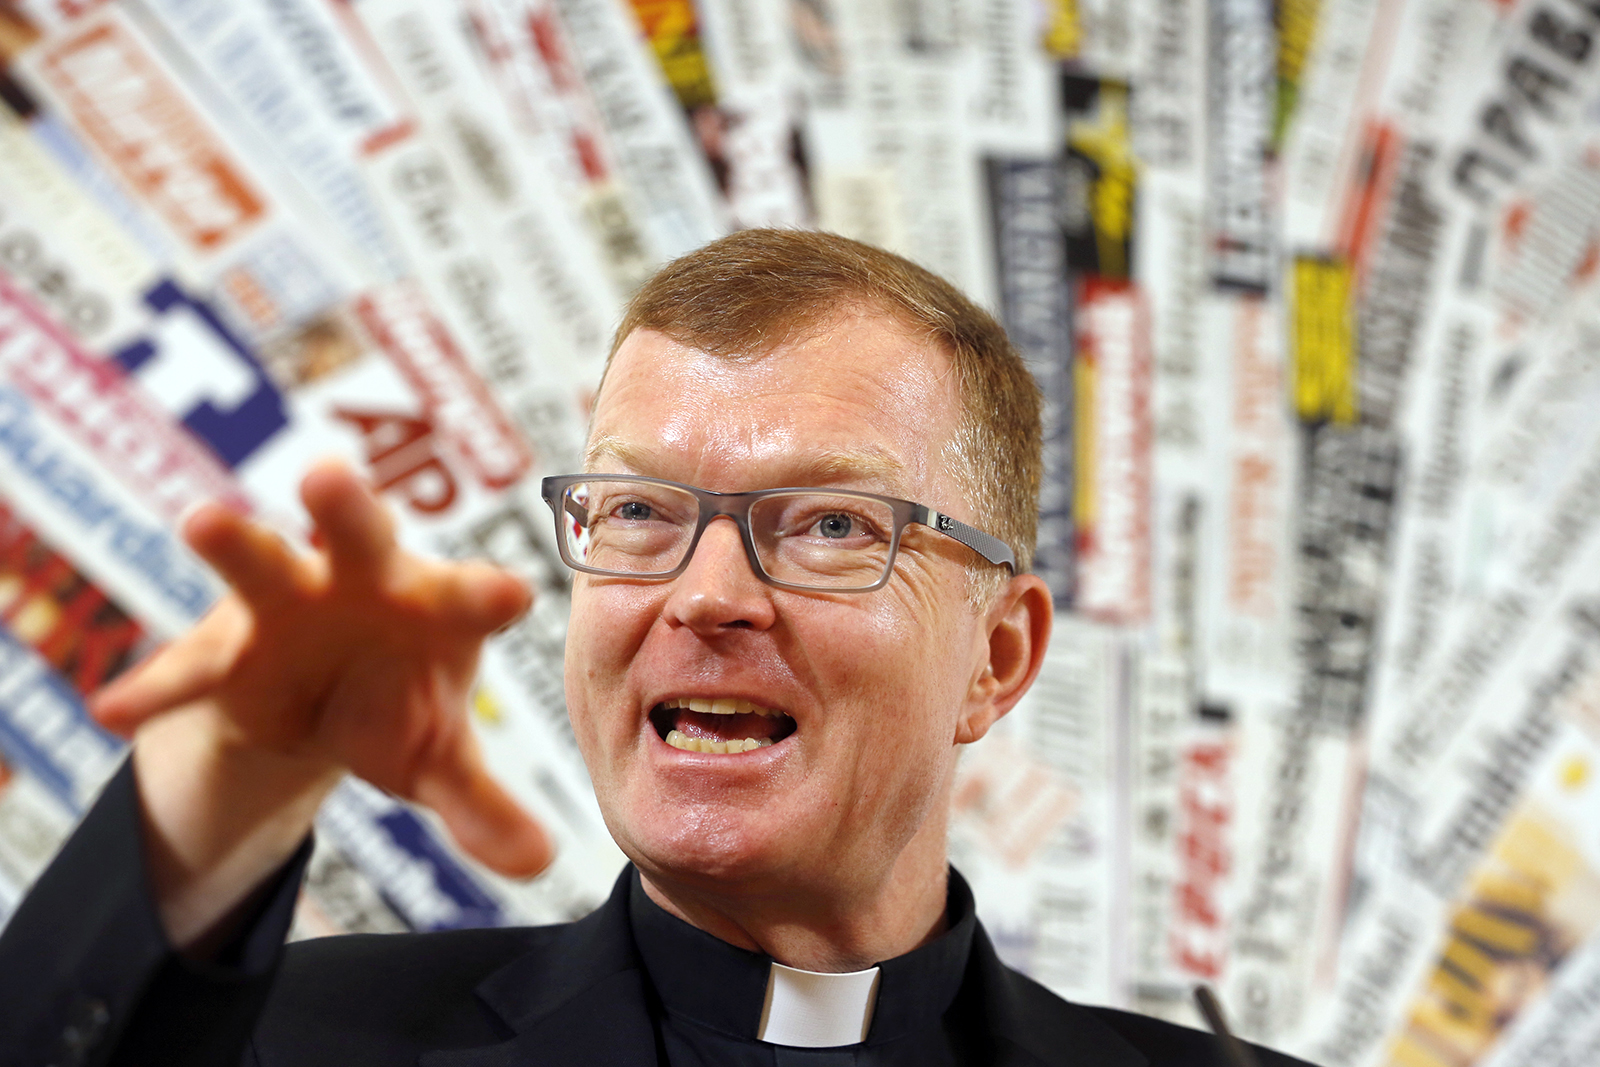 Father Hans Zollner, one of the founding members of the Pontifical Commission for the Protection of Minors, speaks during a press conference at the Foreign Press Association headquarters, in Rome, Thursday, Sept. 27, 2018. (AP Photo/Domenico Stinellis)